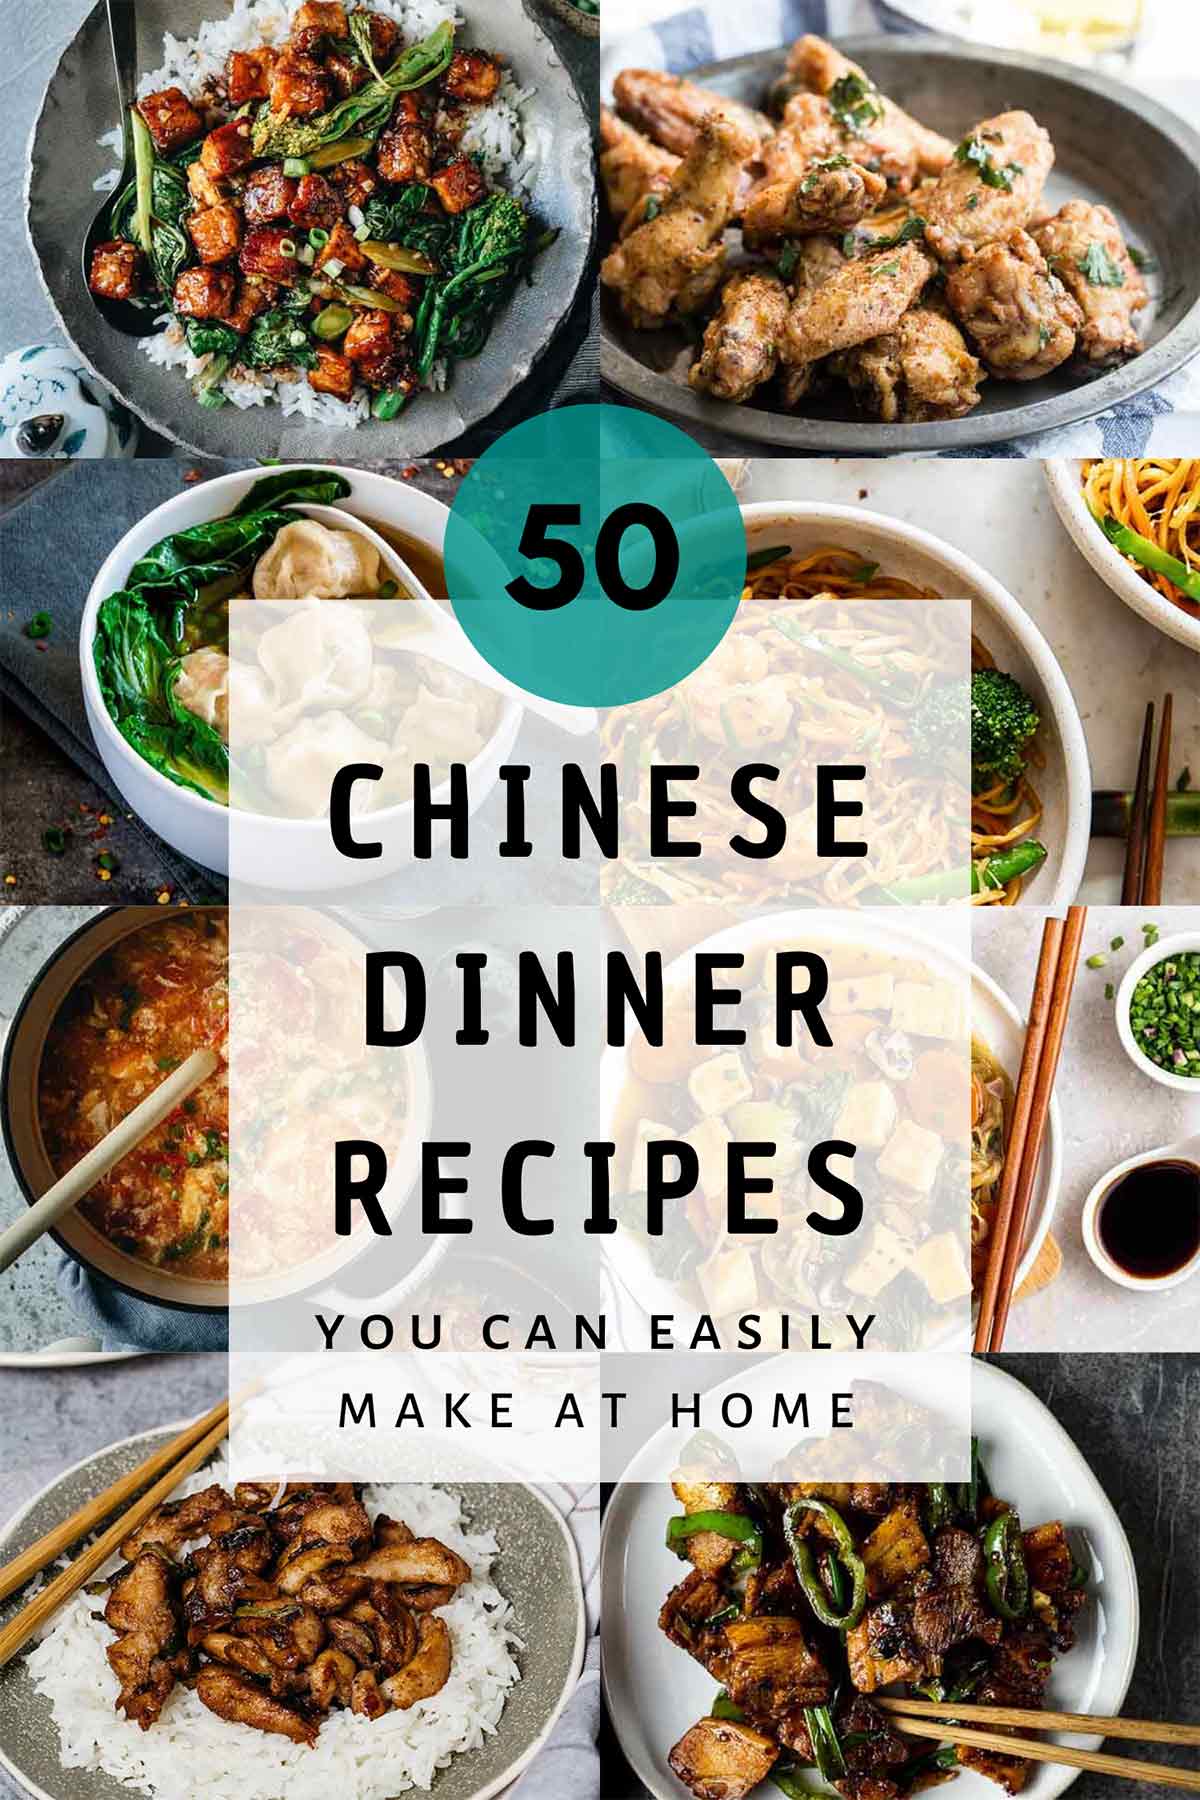 Chinese dinner recipes featured image